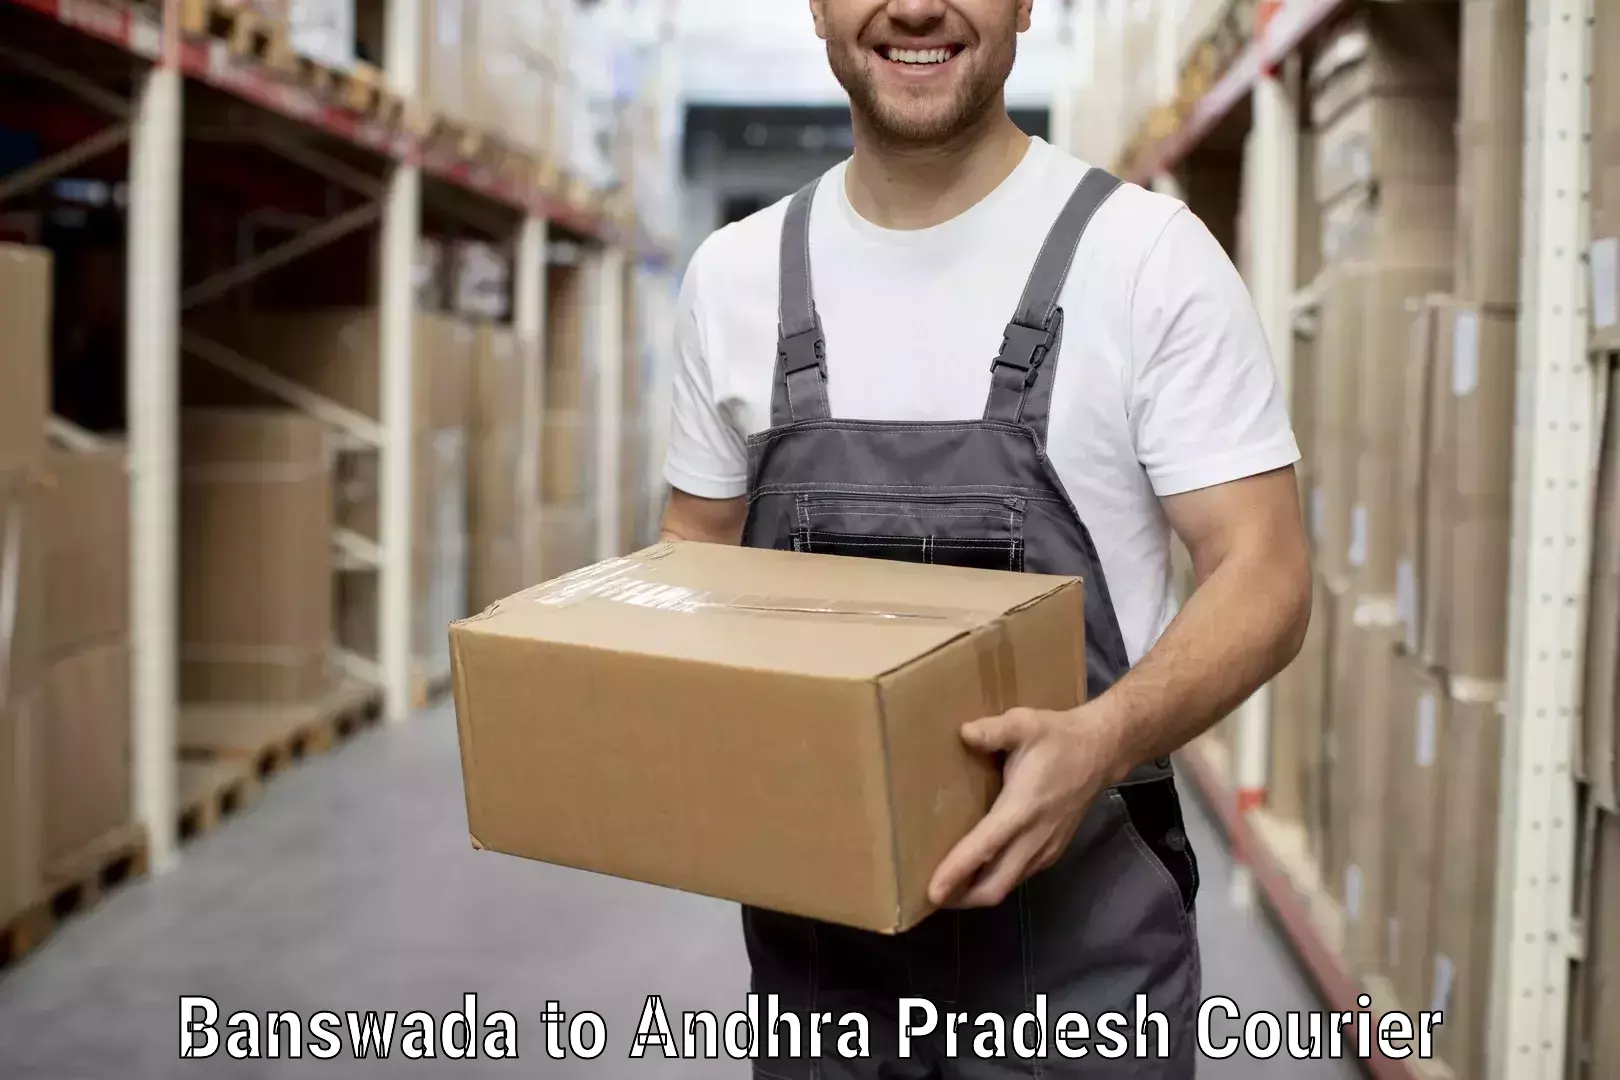 Moving and handling services in Banswada to Puttur Tirupati